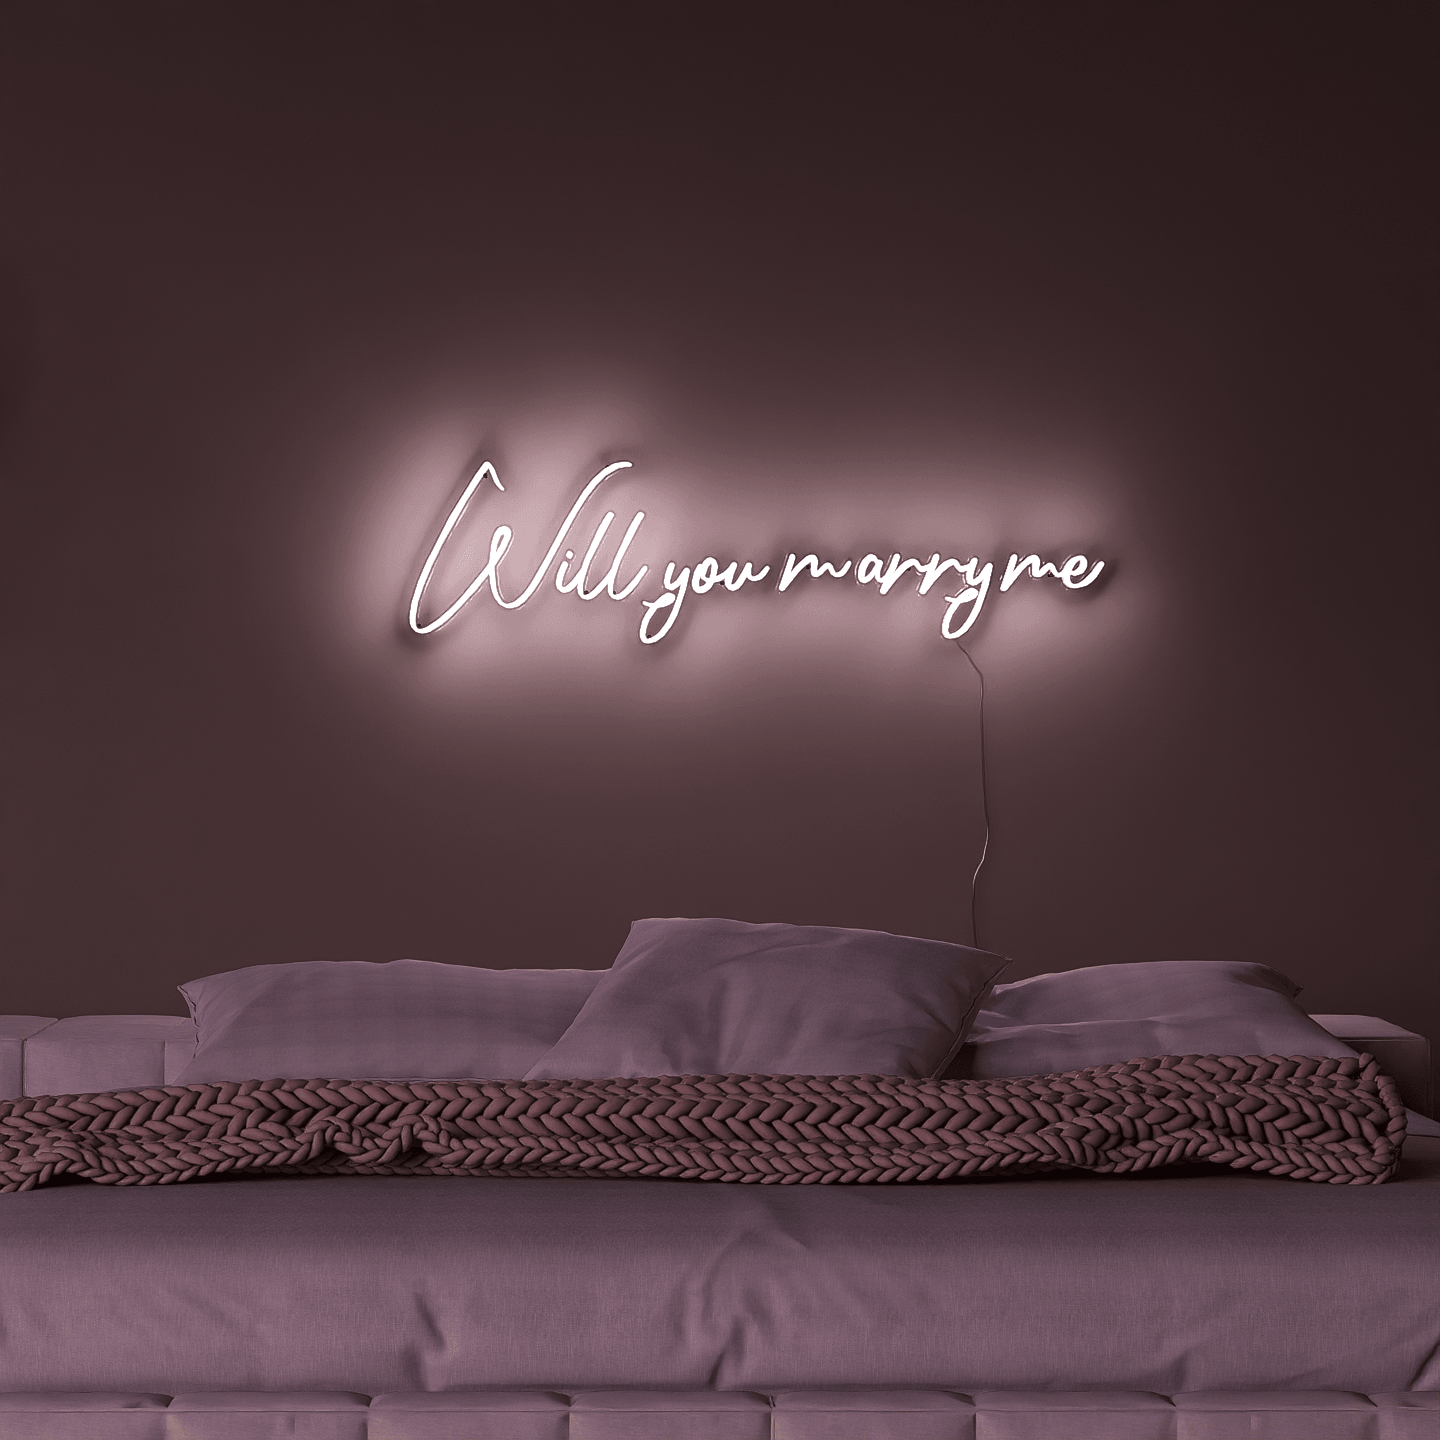 frontal-shot-of-lit-white-neon-lights-hanging-on-the-wall-will-you-marry-me